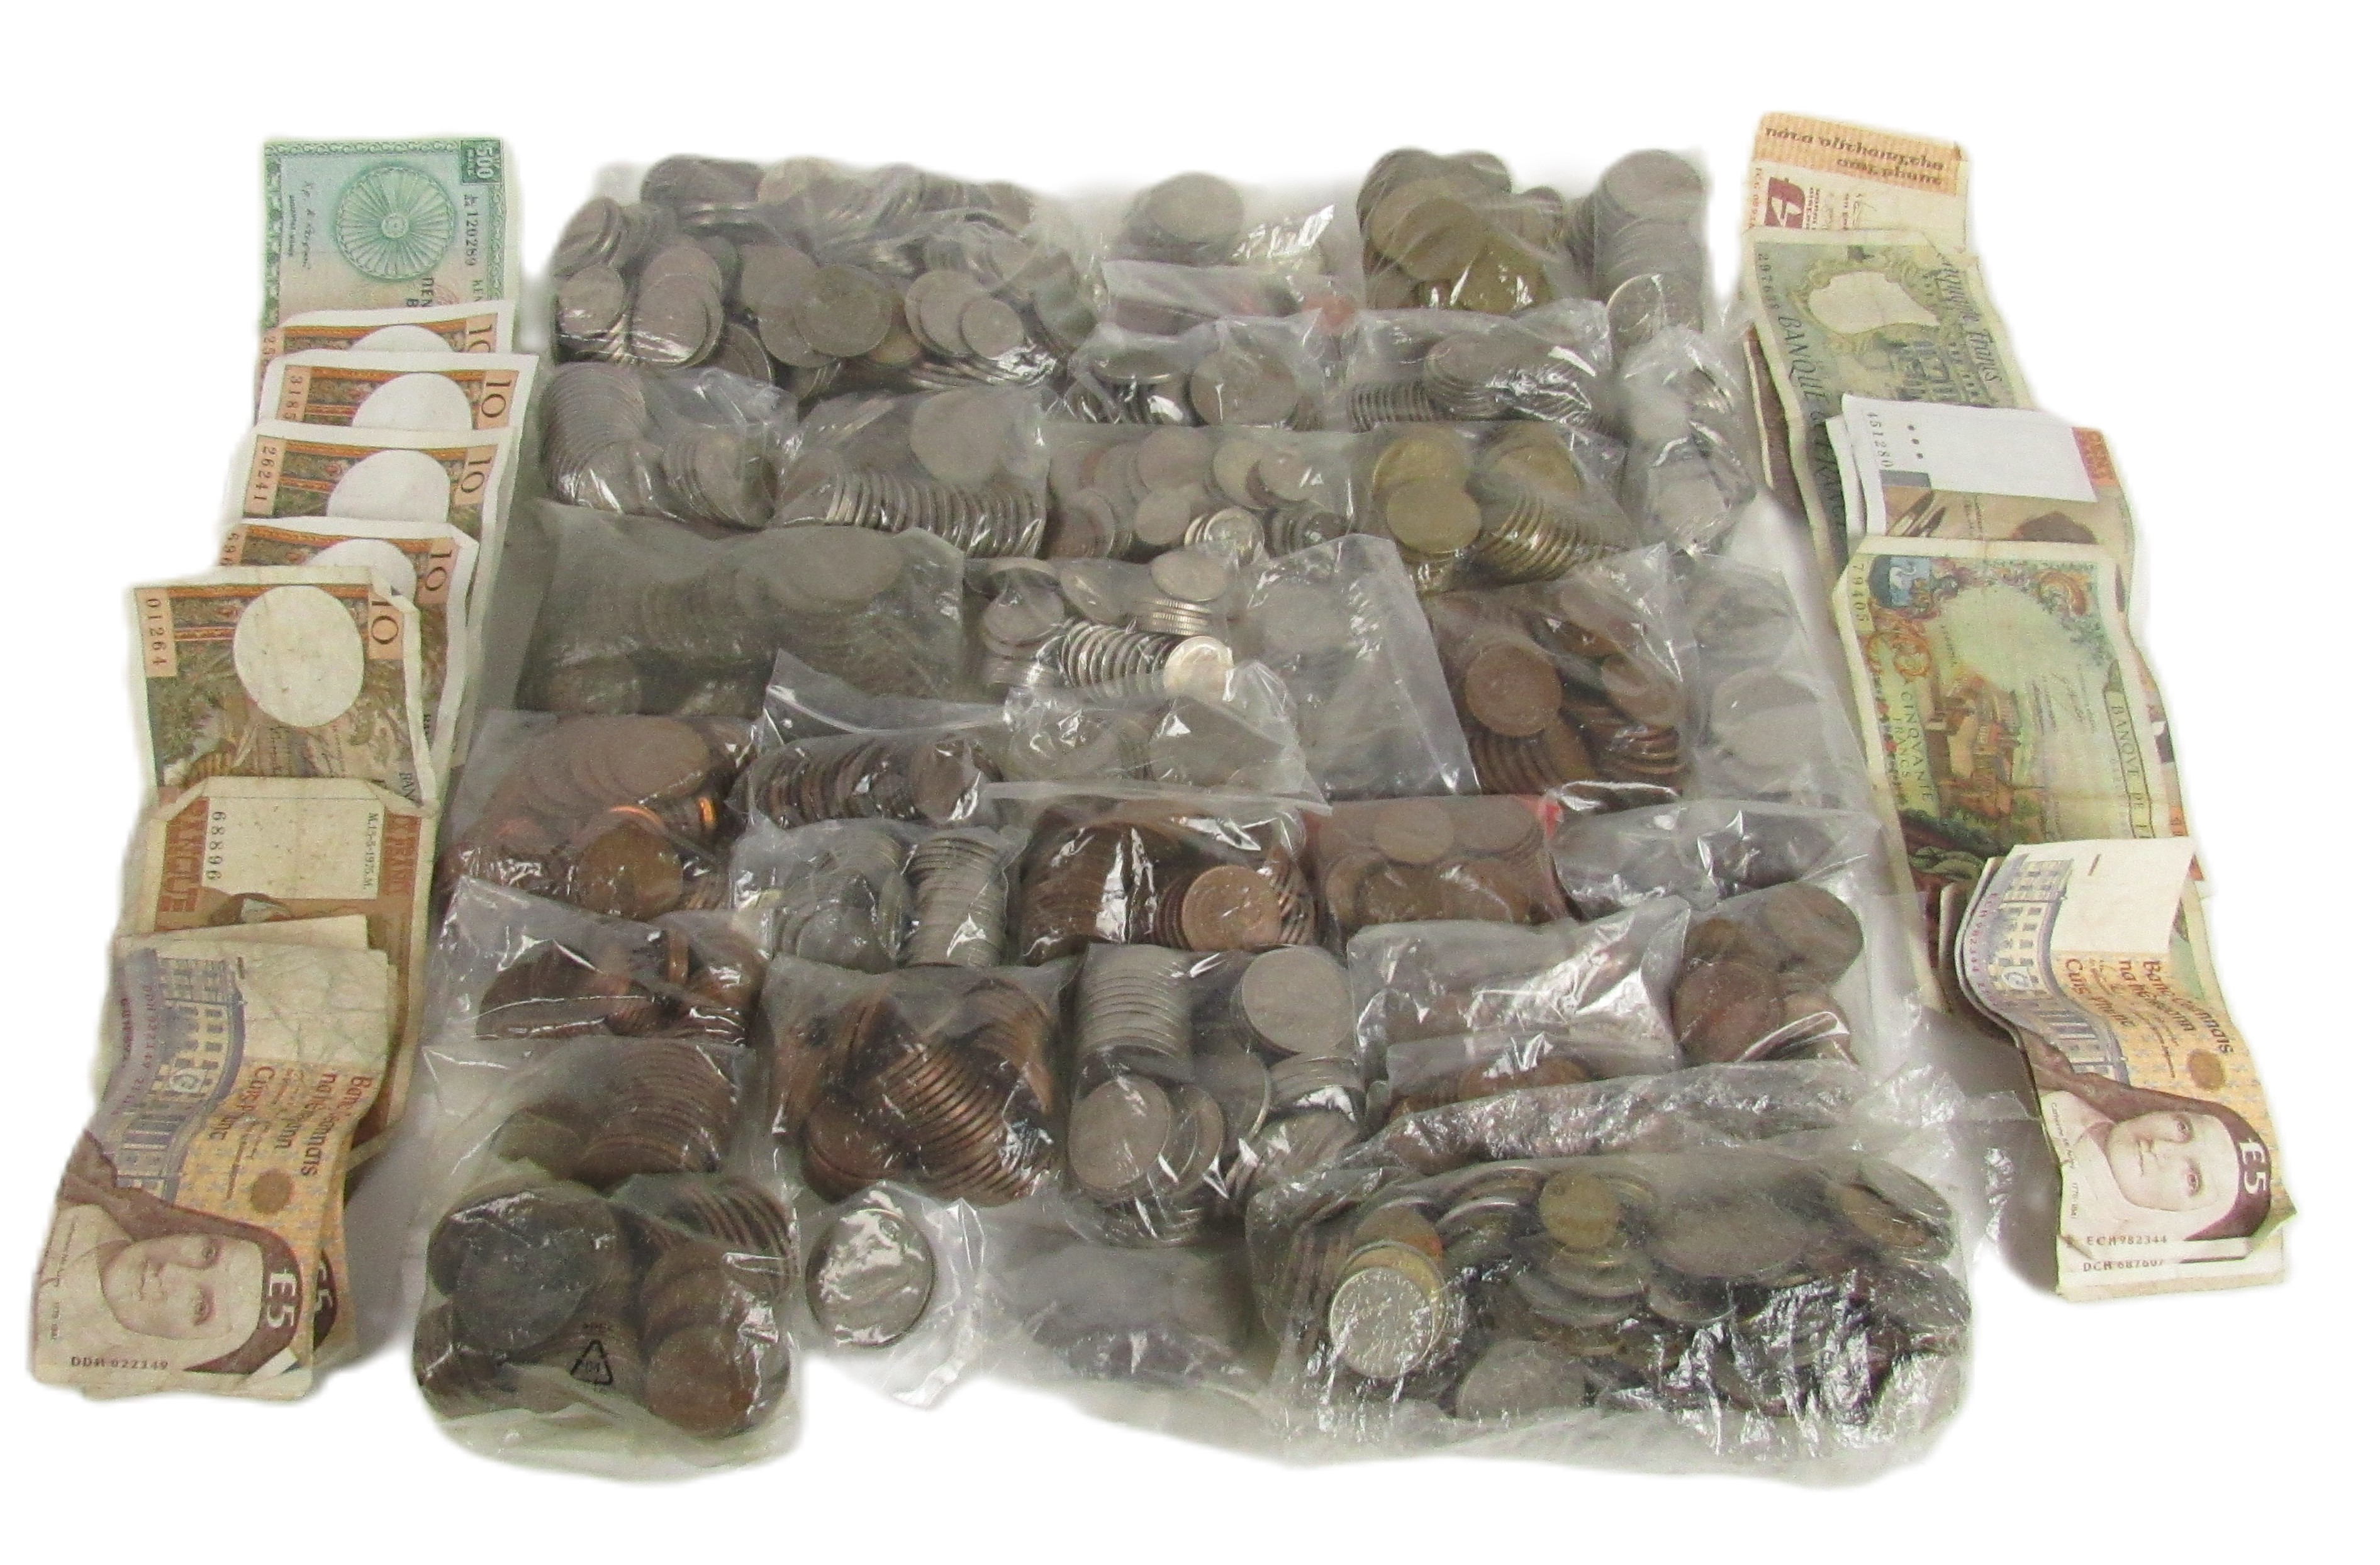 [Coins & Notes]: A large collection of Irish and English Coins, including pennies, farthings, 5